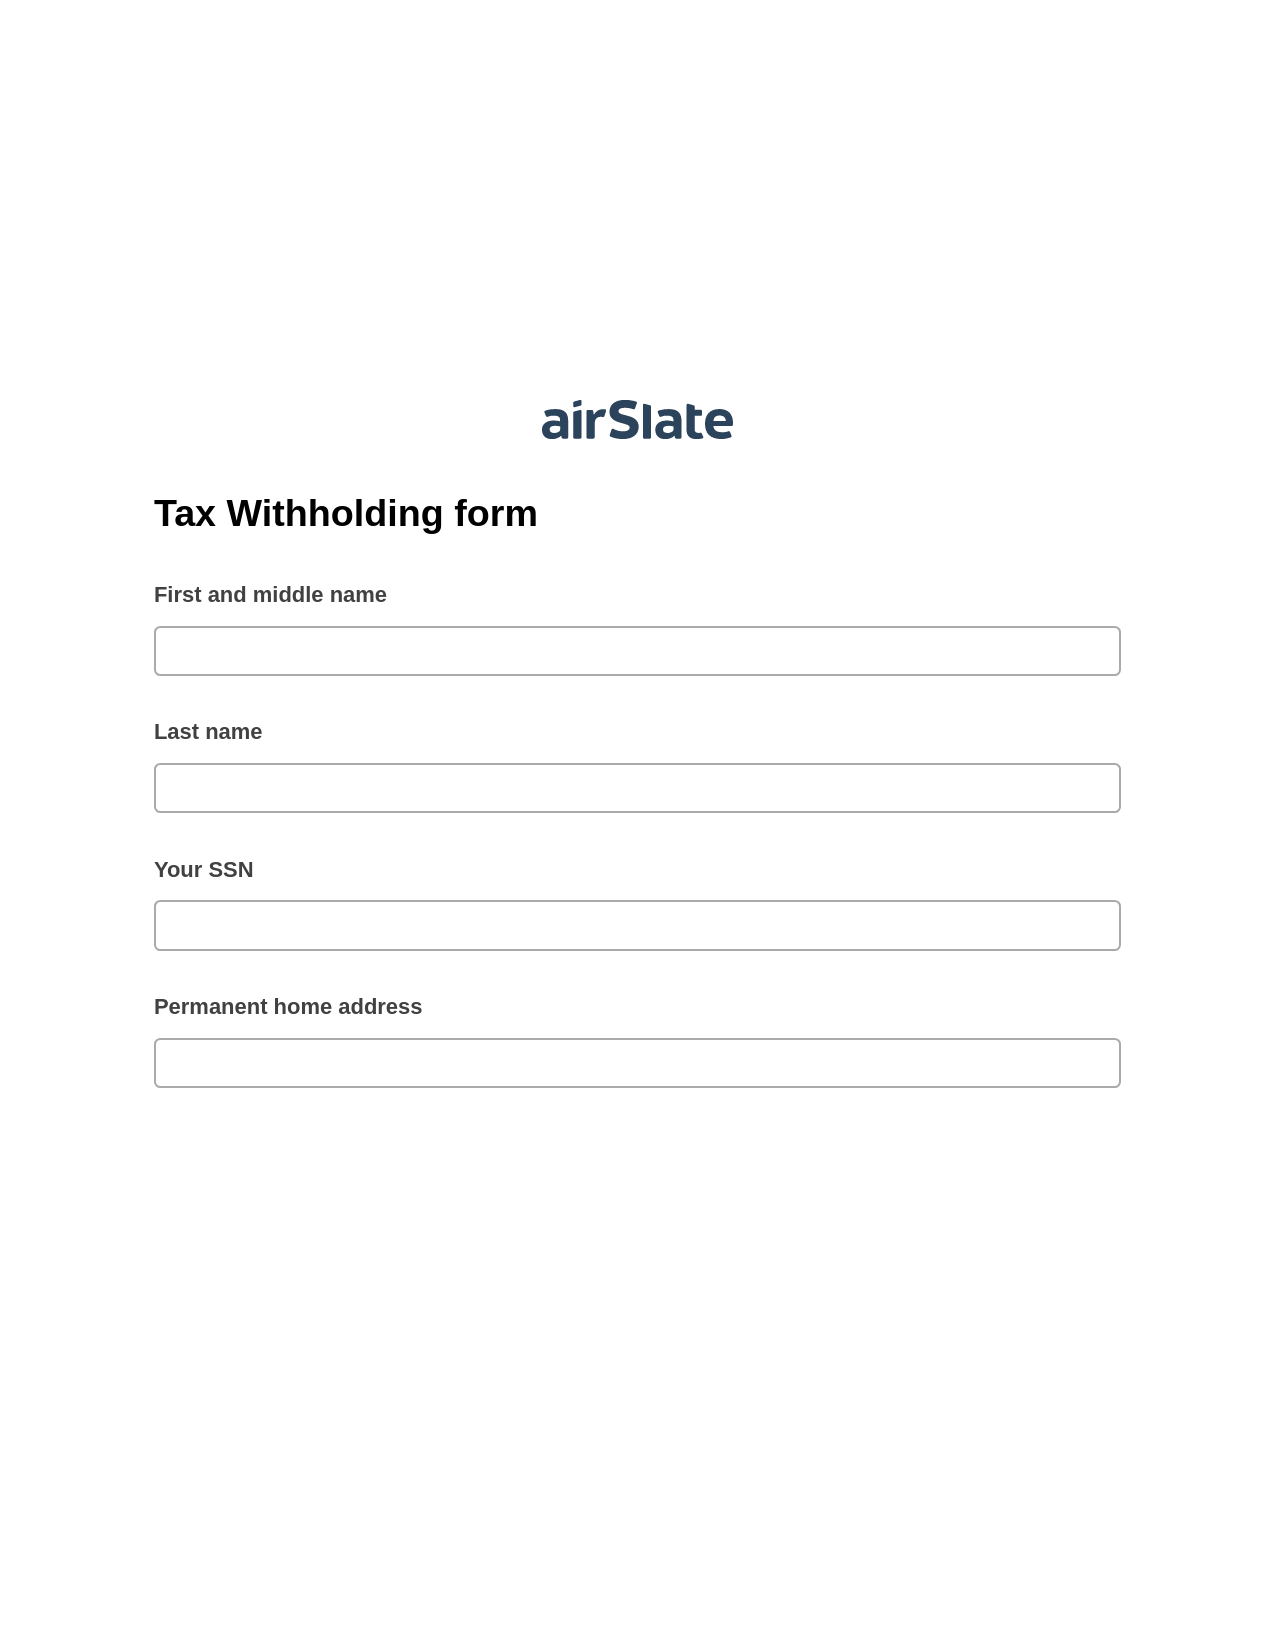 Multirole Tax Withholding form Pre-fill Document Bot, Send a Slate to MS Dynamics 365 Contact Bot, Post-finish Document Bot